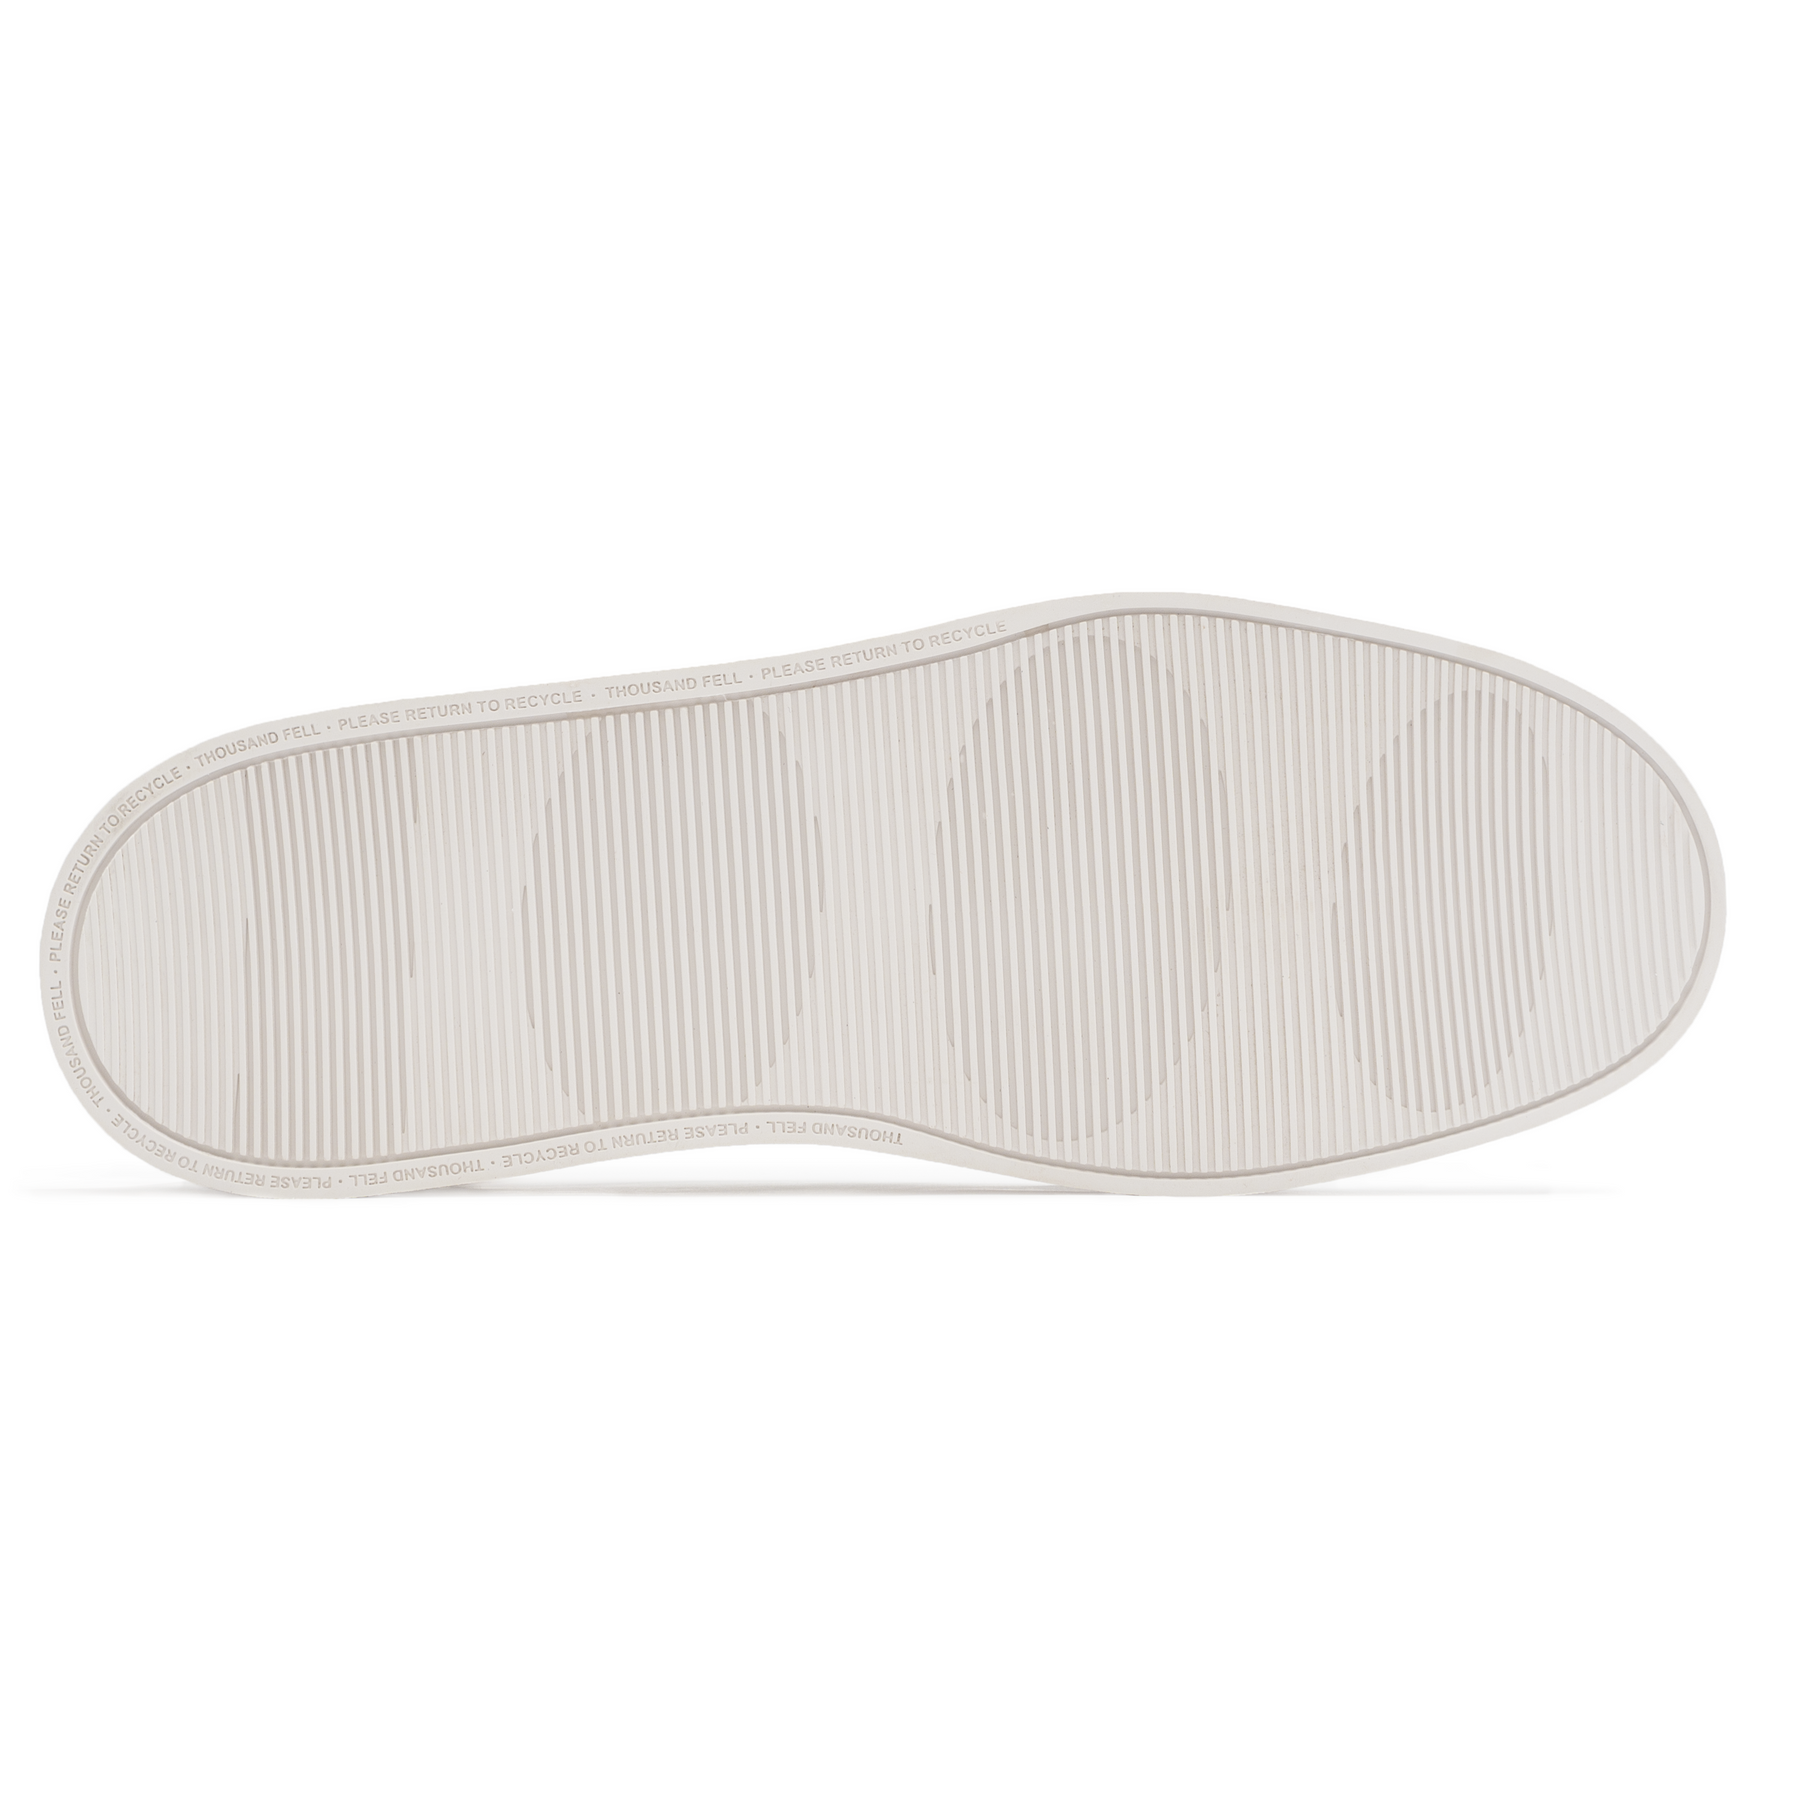 sole view of sustainable white sneakers